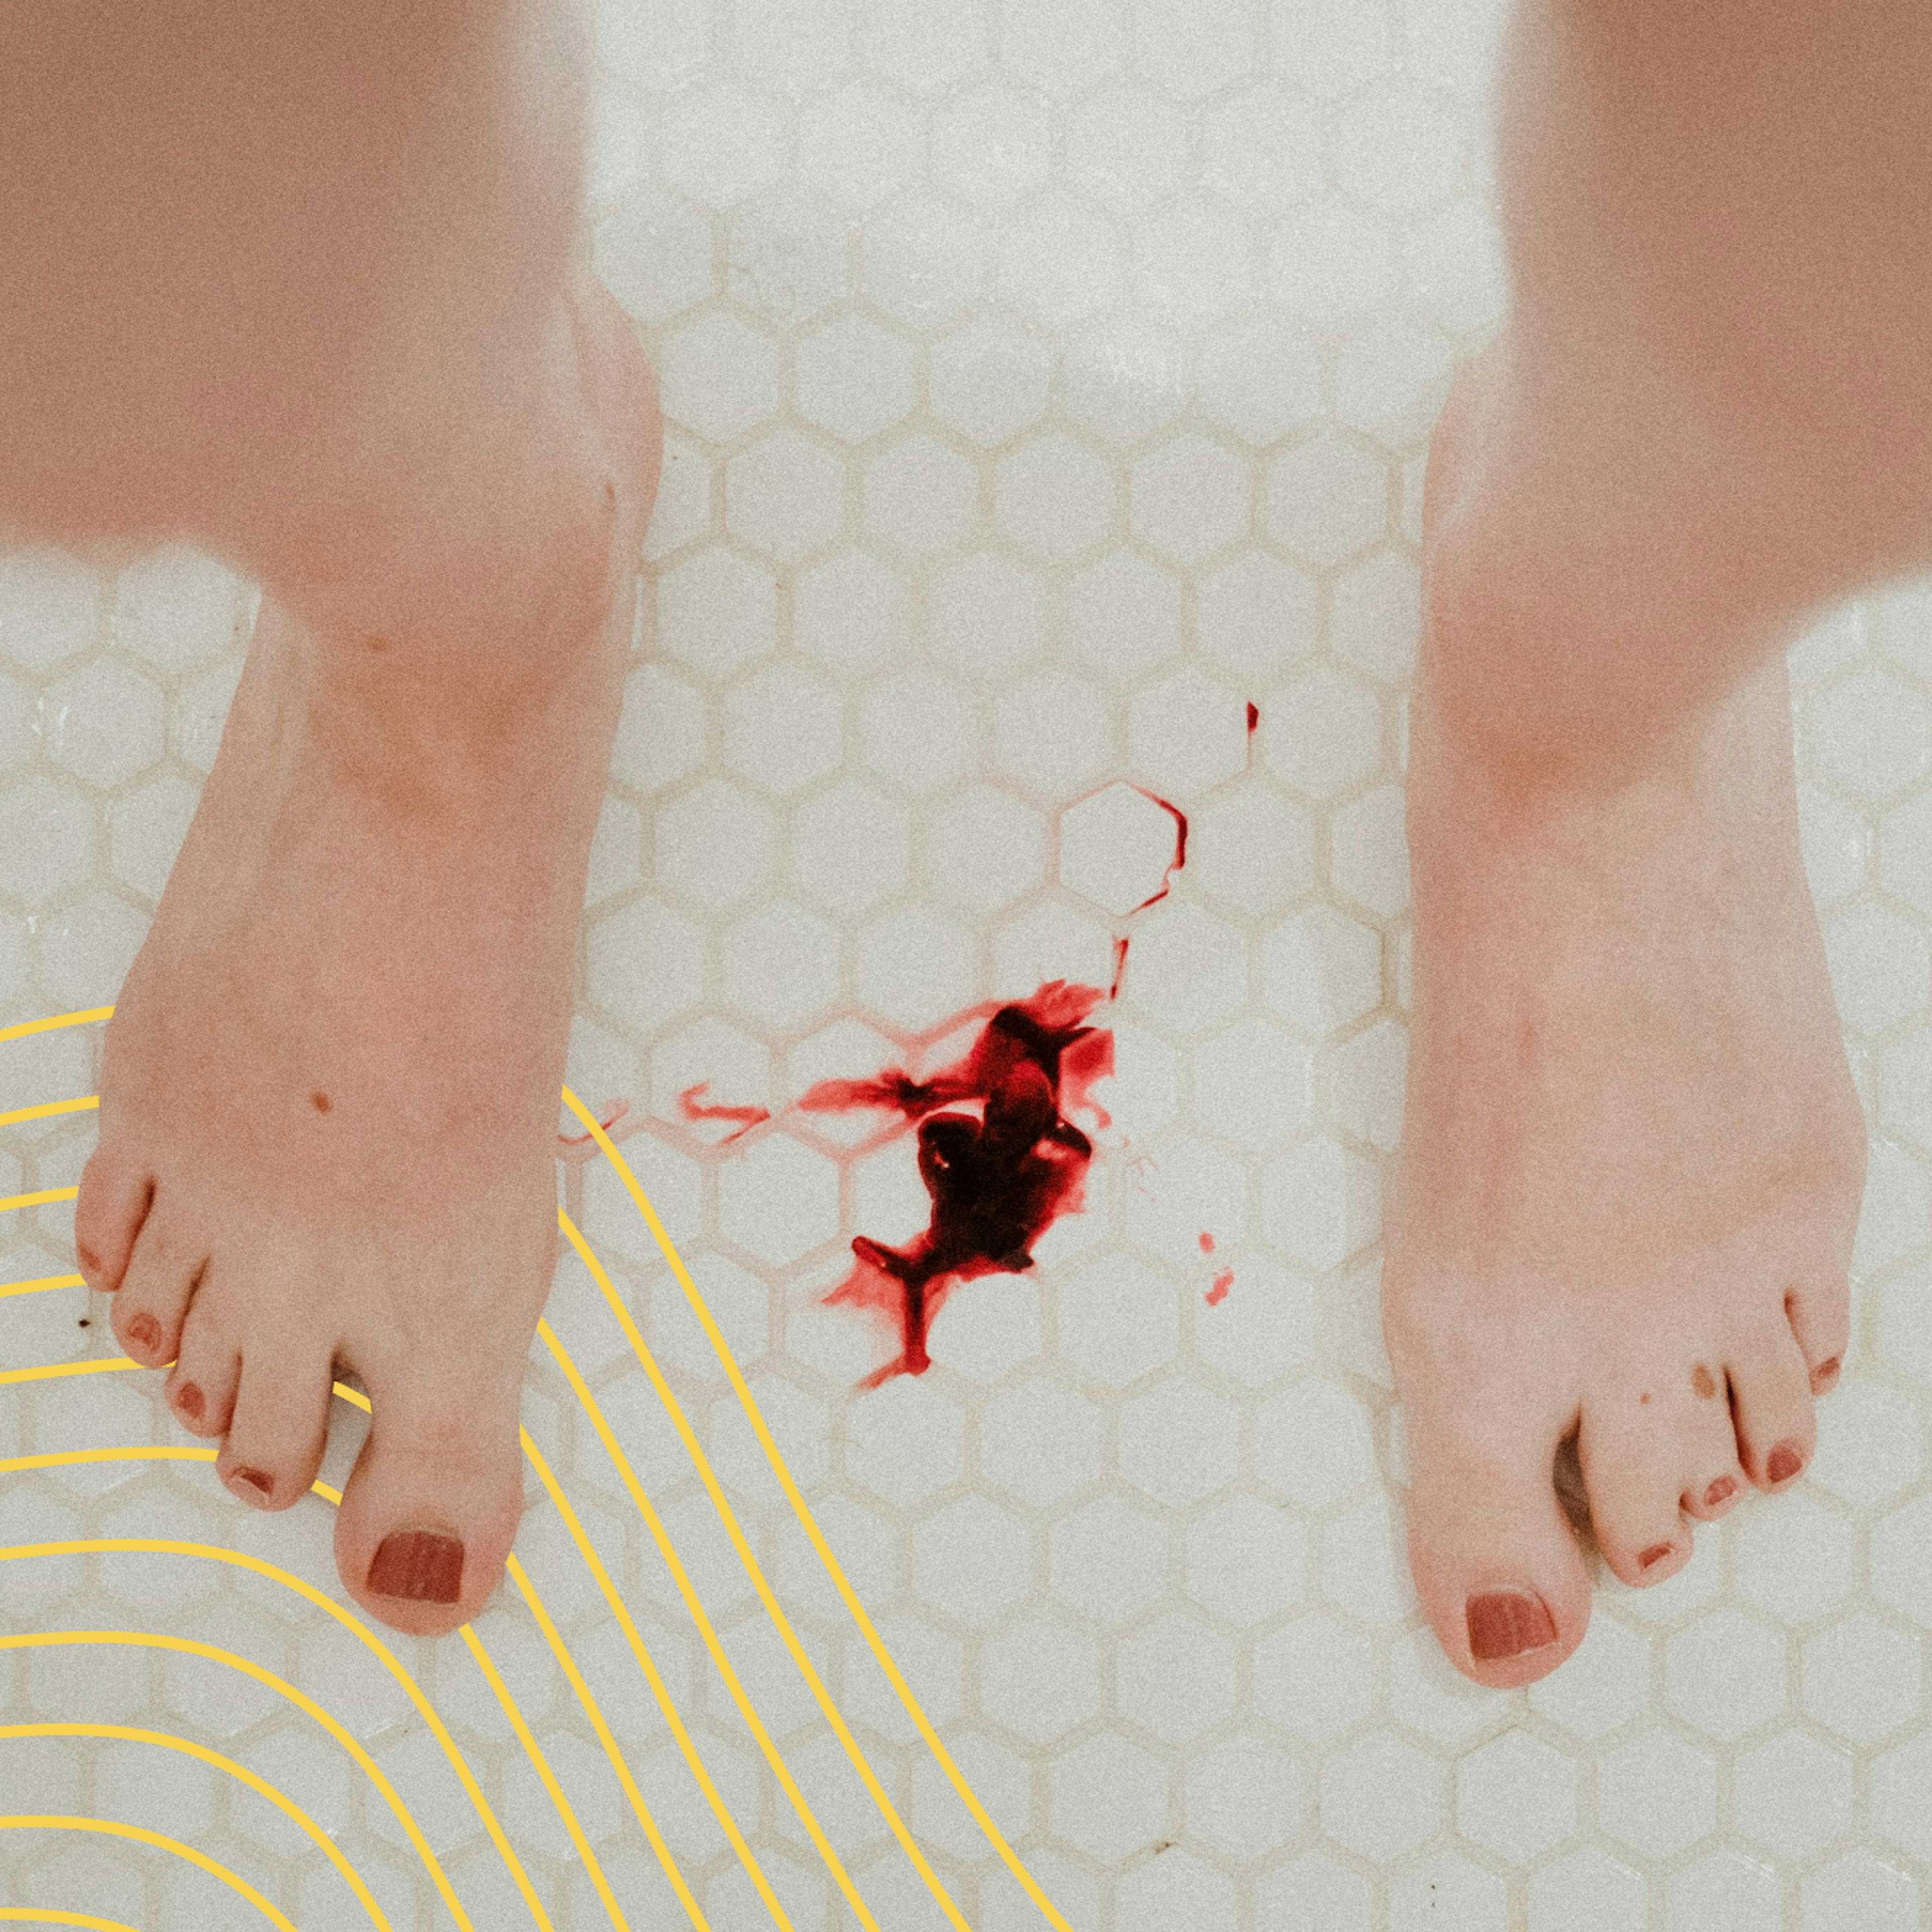 A woman bleeds on the floor following her miscarriage.